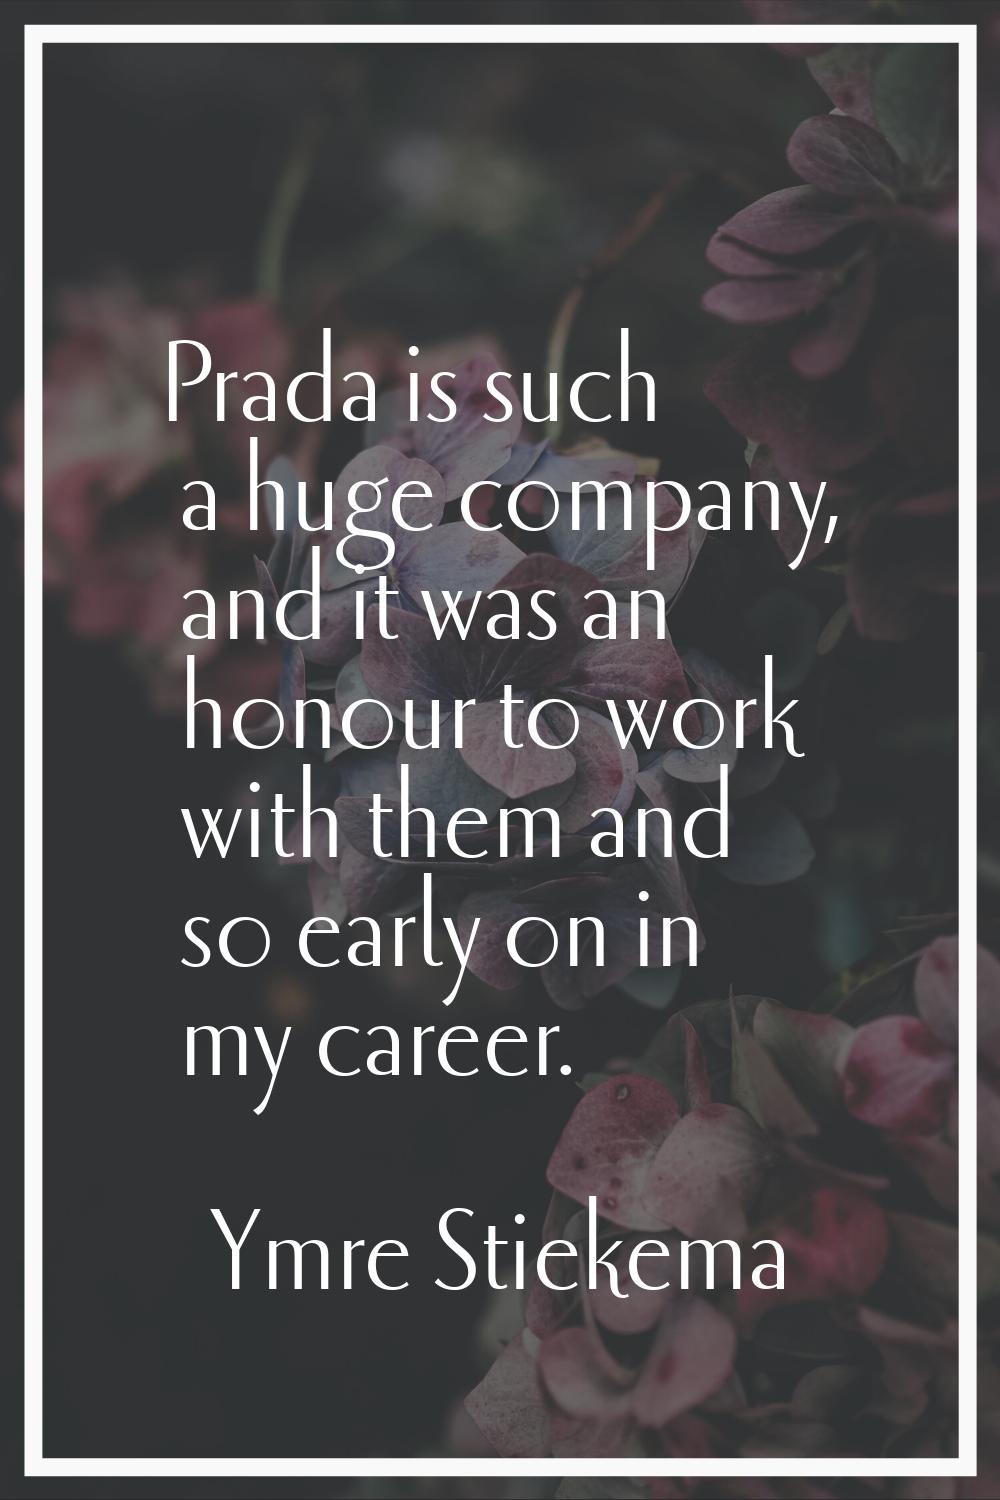 Prada is such a huge company, and it was an honour to work with them and so early on in my career.